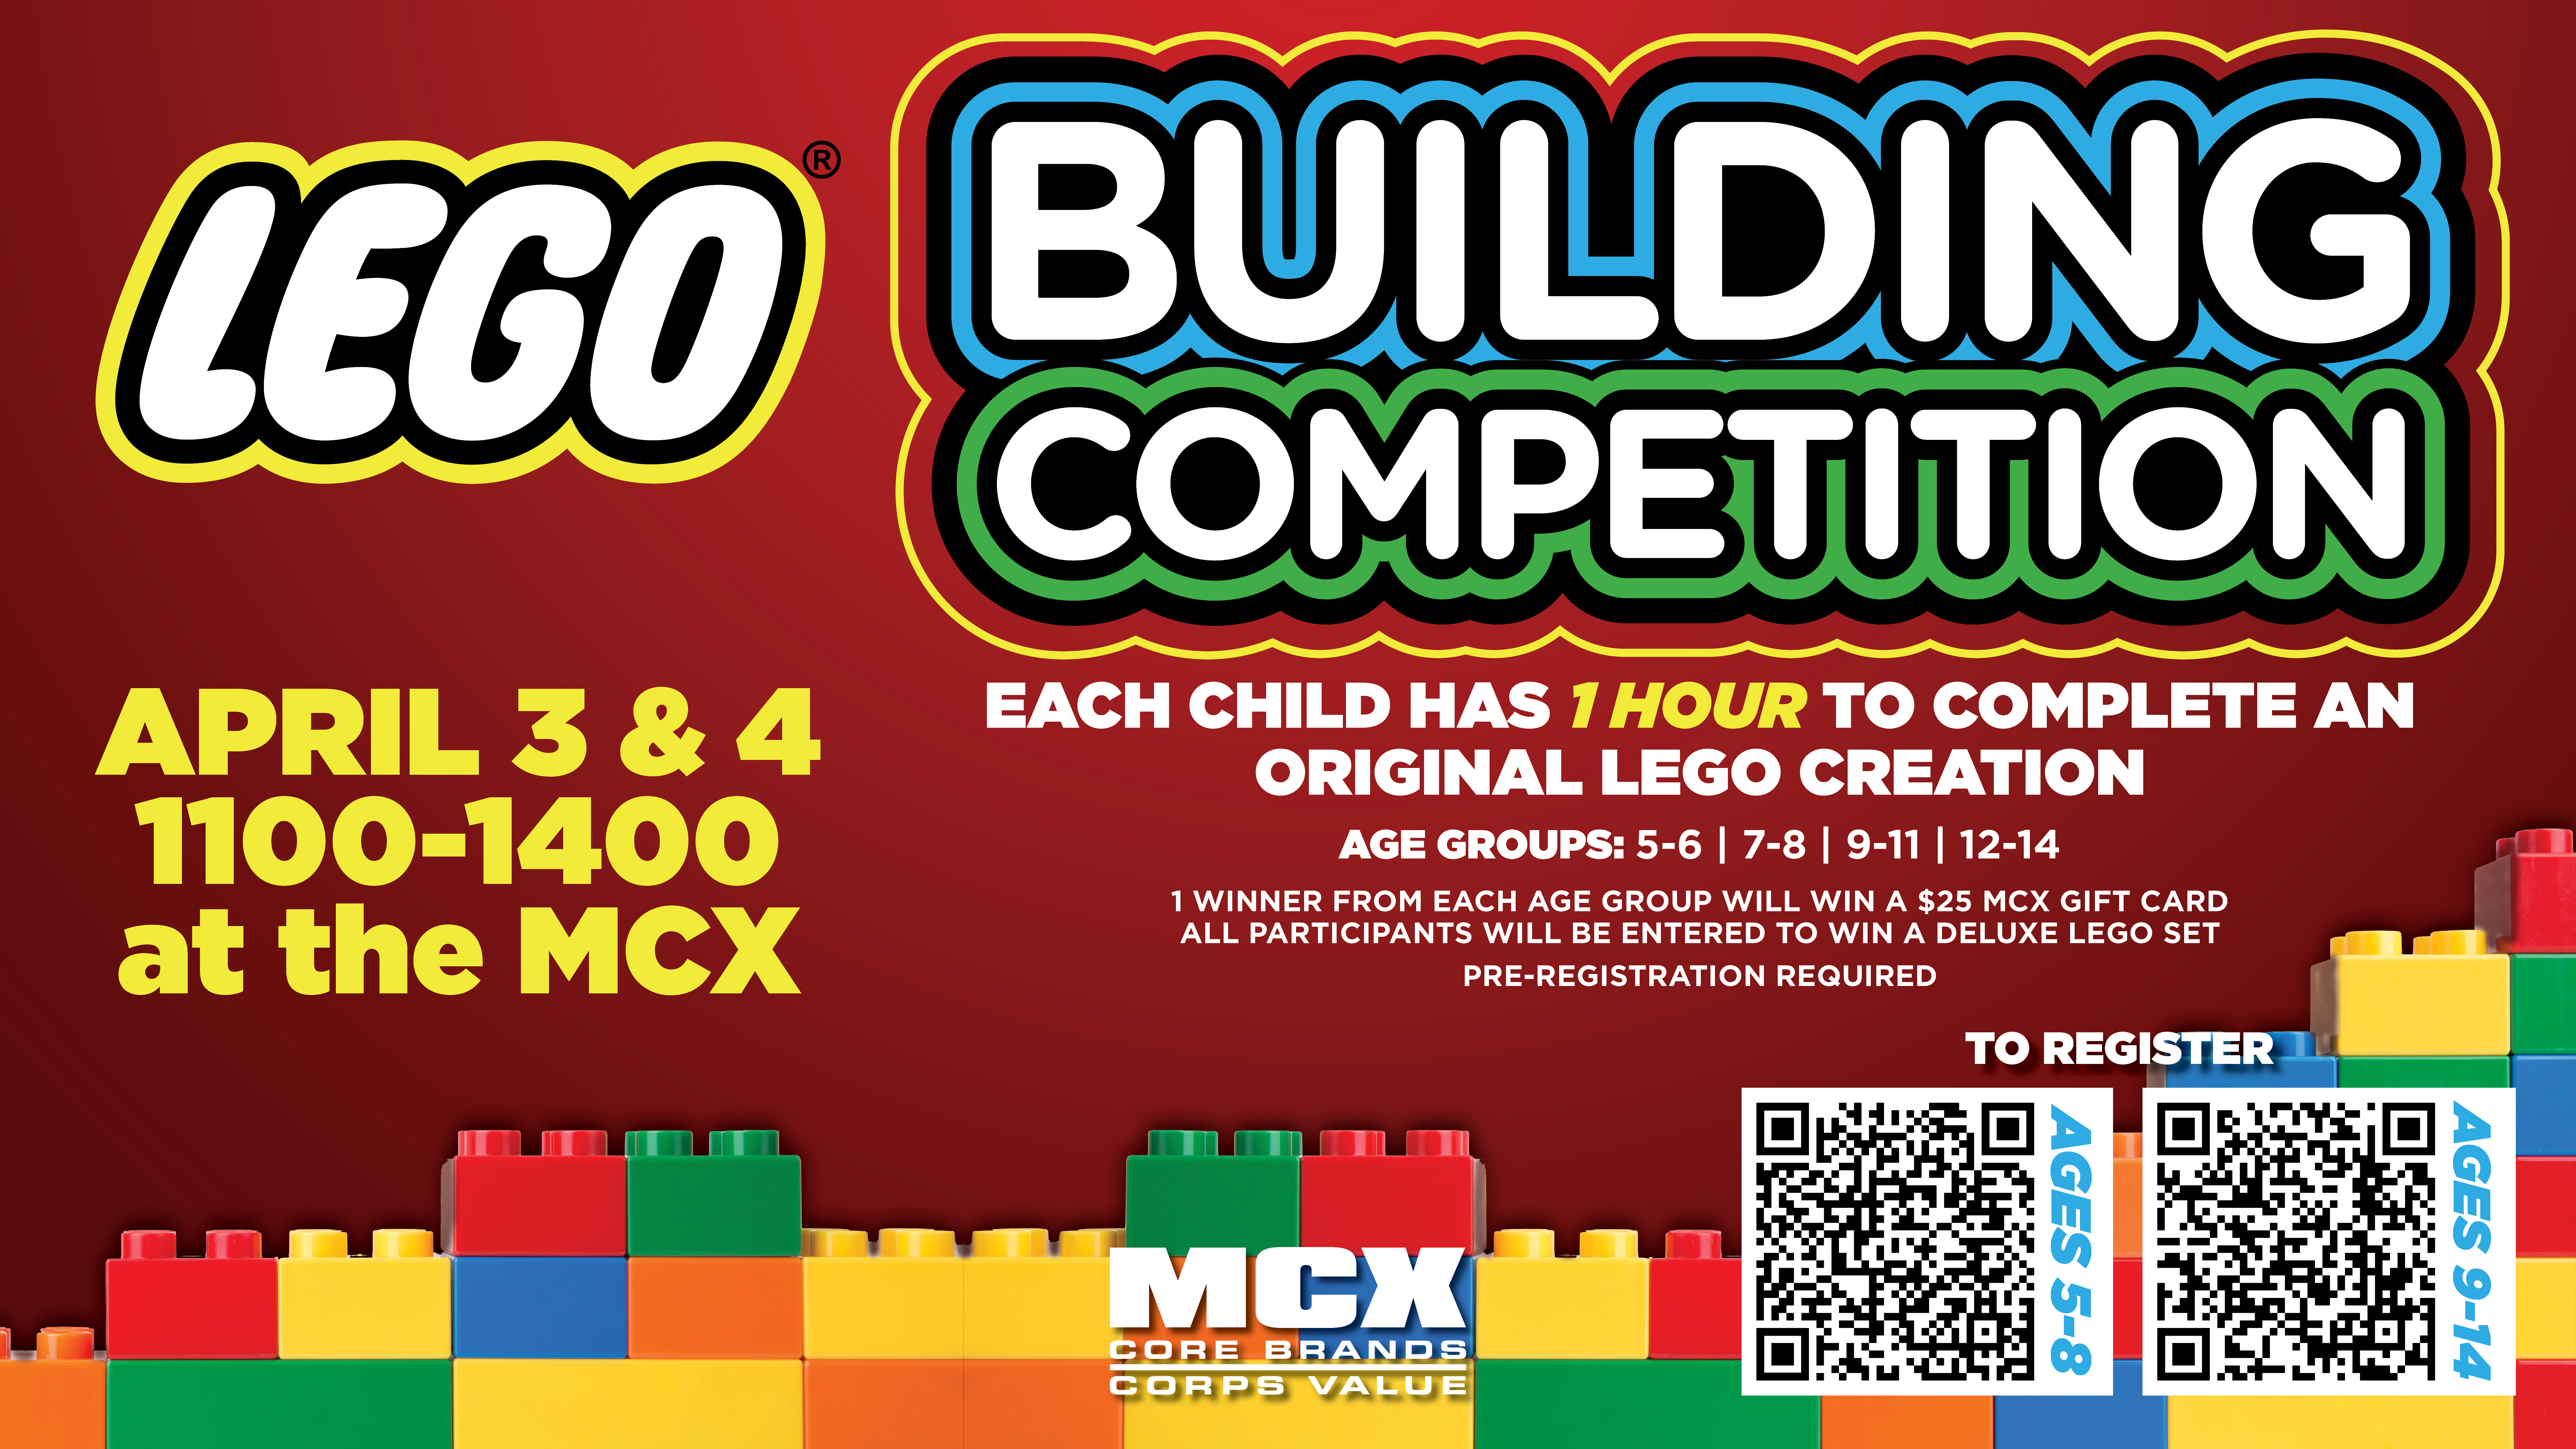 Lego Building Competition